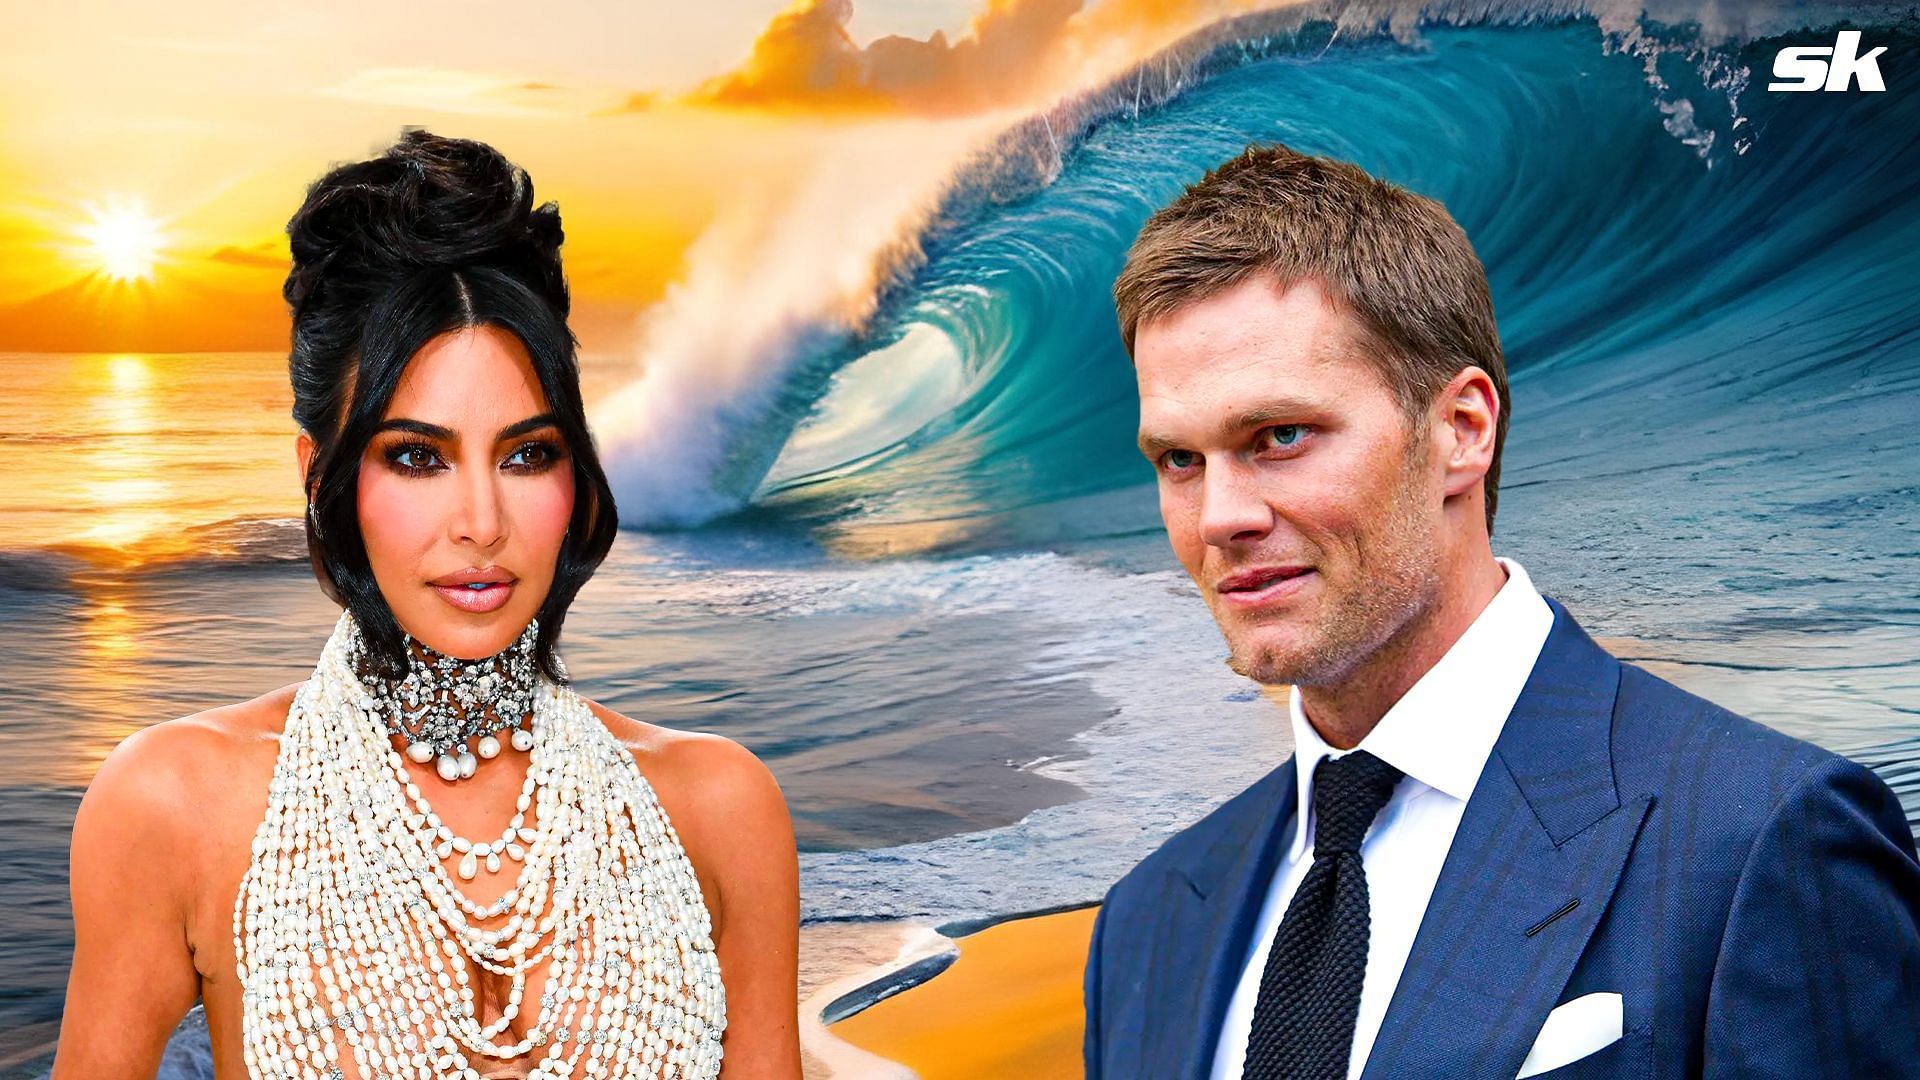 Podcast host cautions Tom Brady against dating Kim Kardashian in extremely sexist take